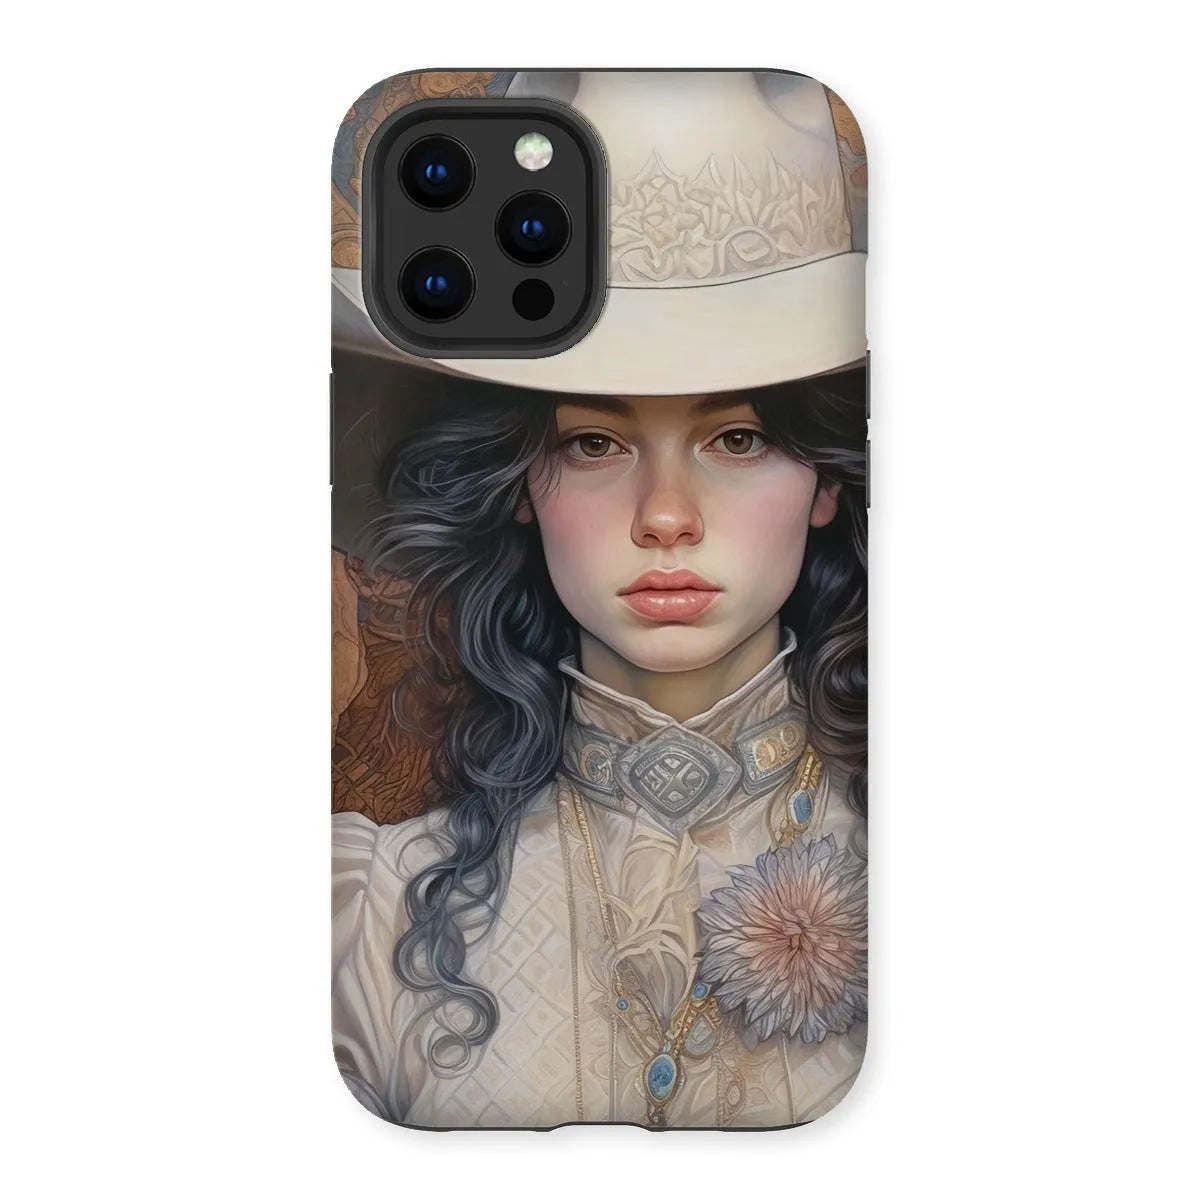 Helena The Lesbian Cowgirl - Sapphic Art Phone Case - Iphone 12 Pro Max / Matte - Mobile Phone Cases - Aesthetic Art